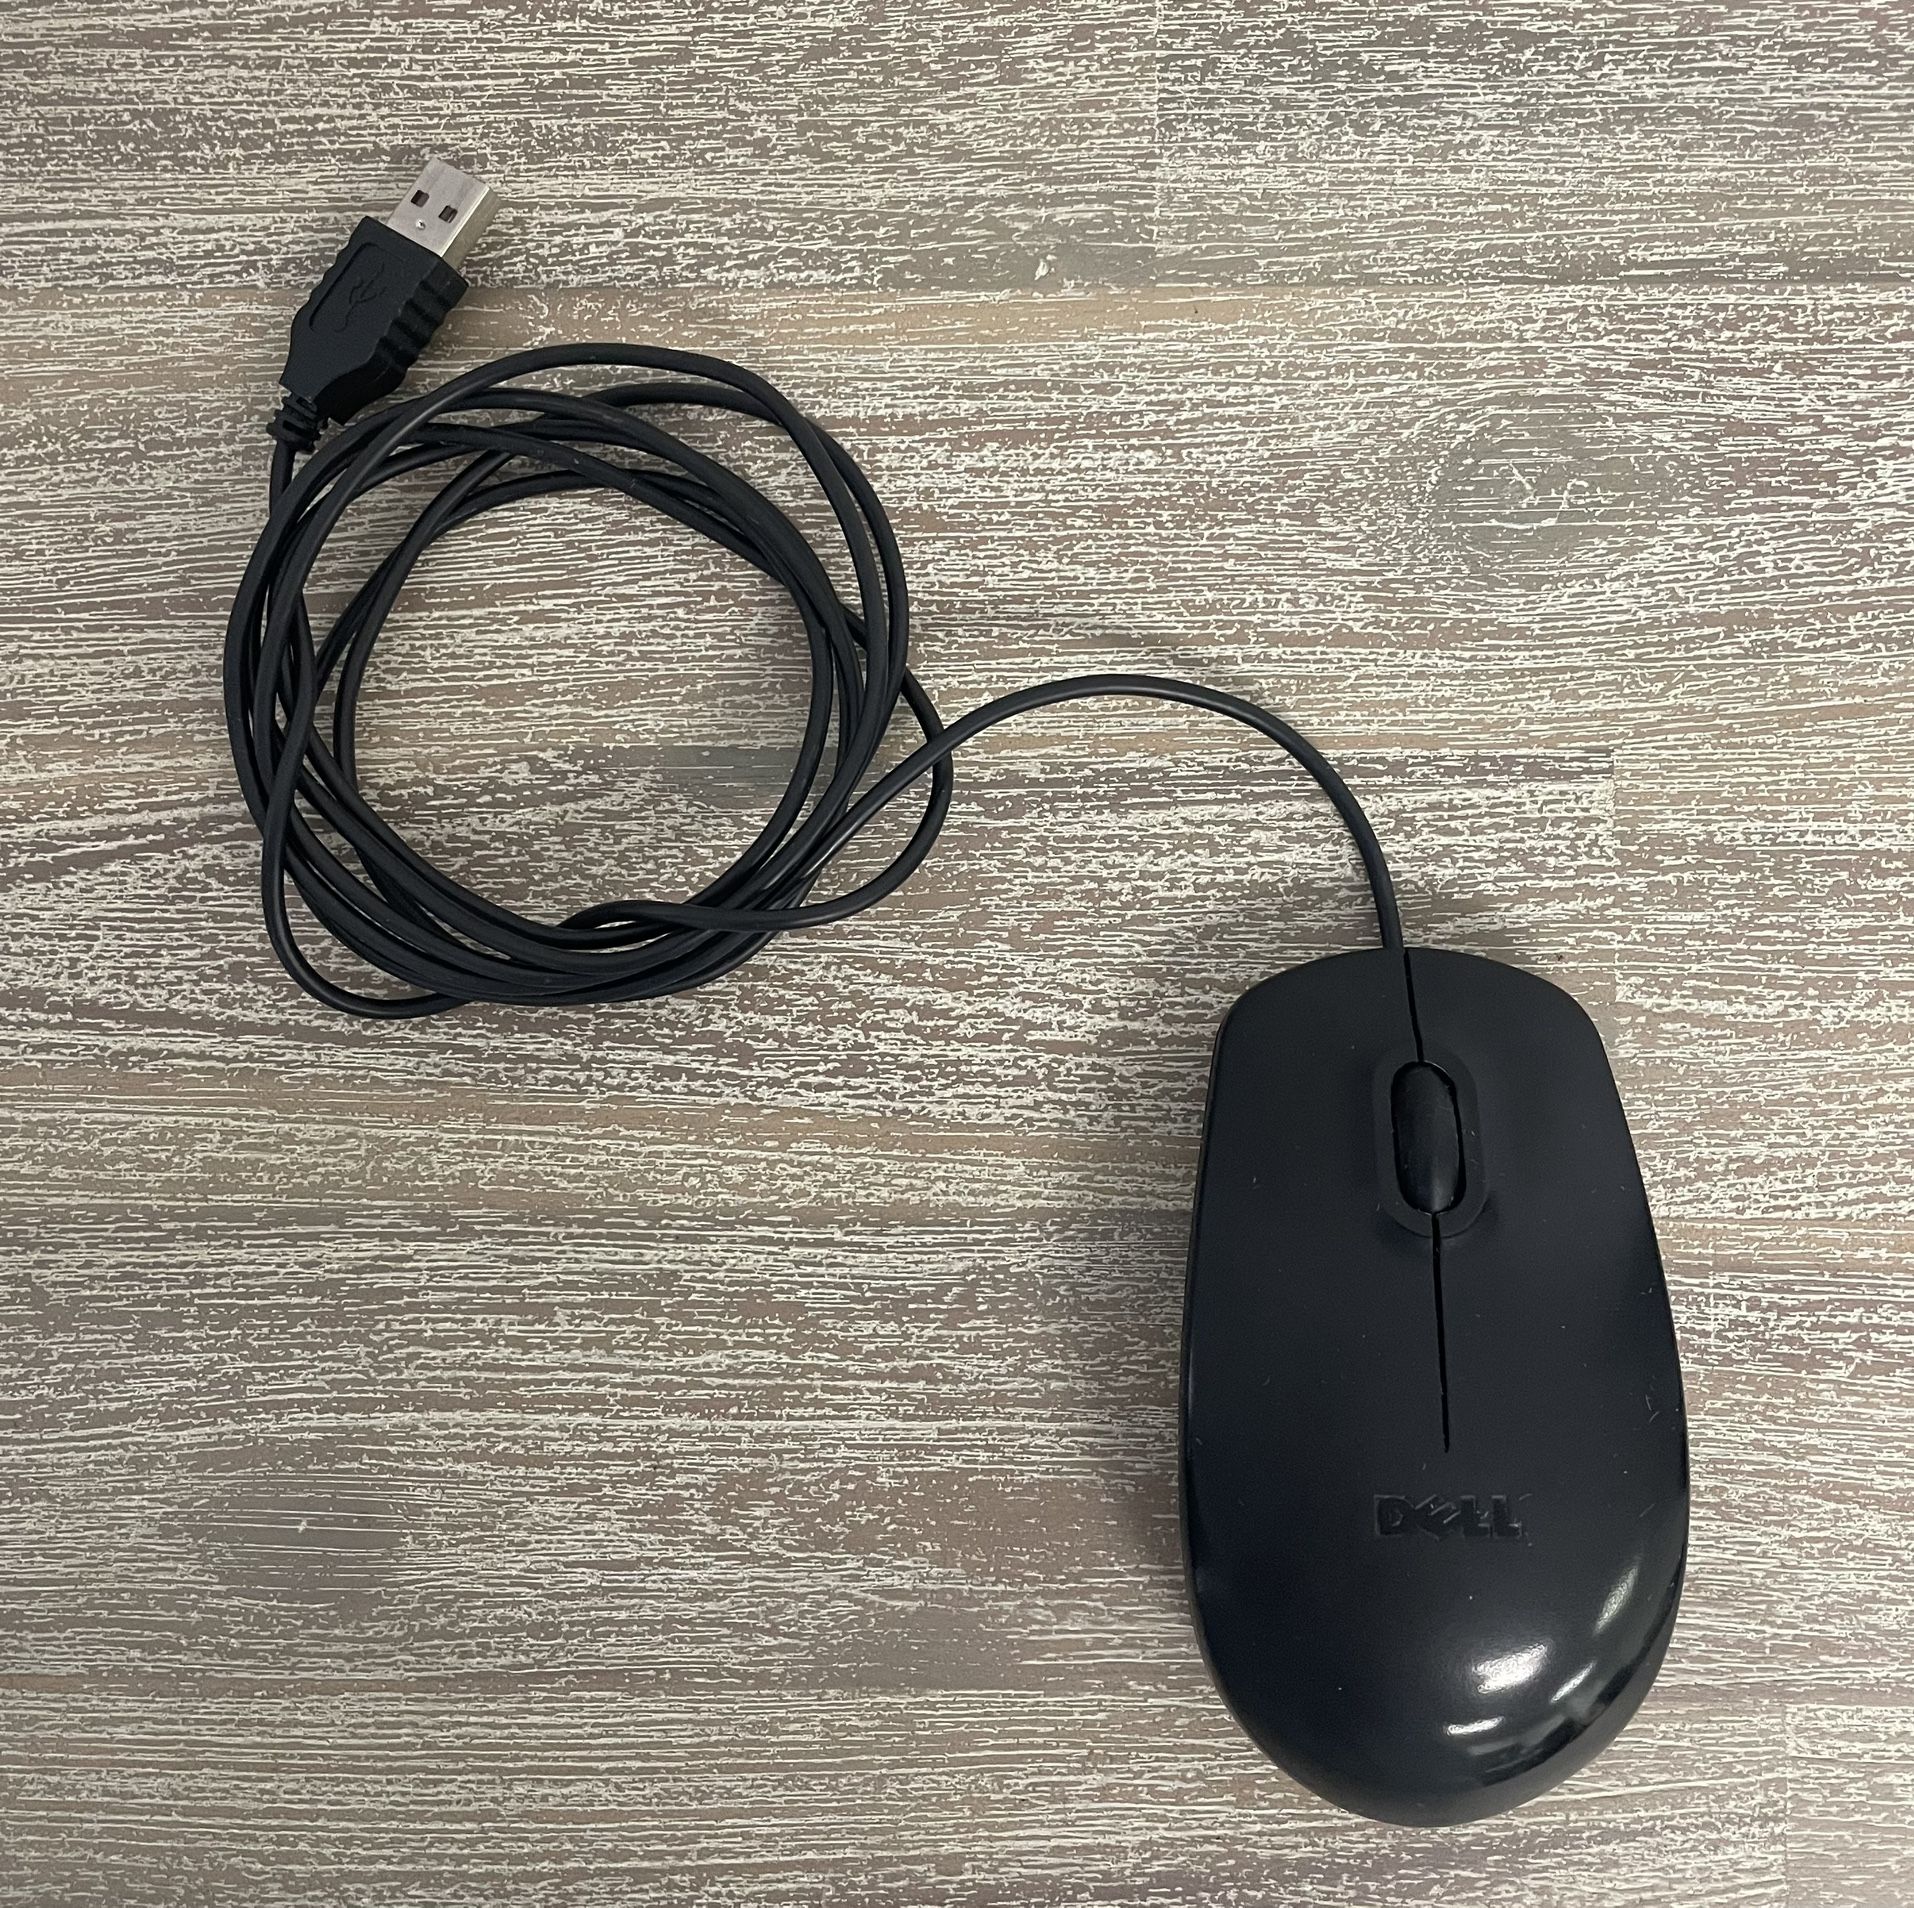 DELL Mouse. USED